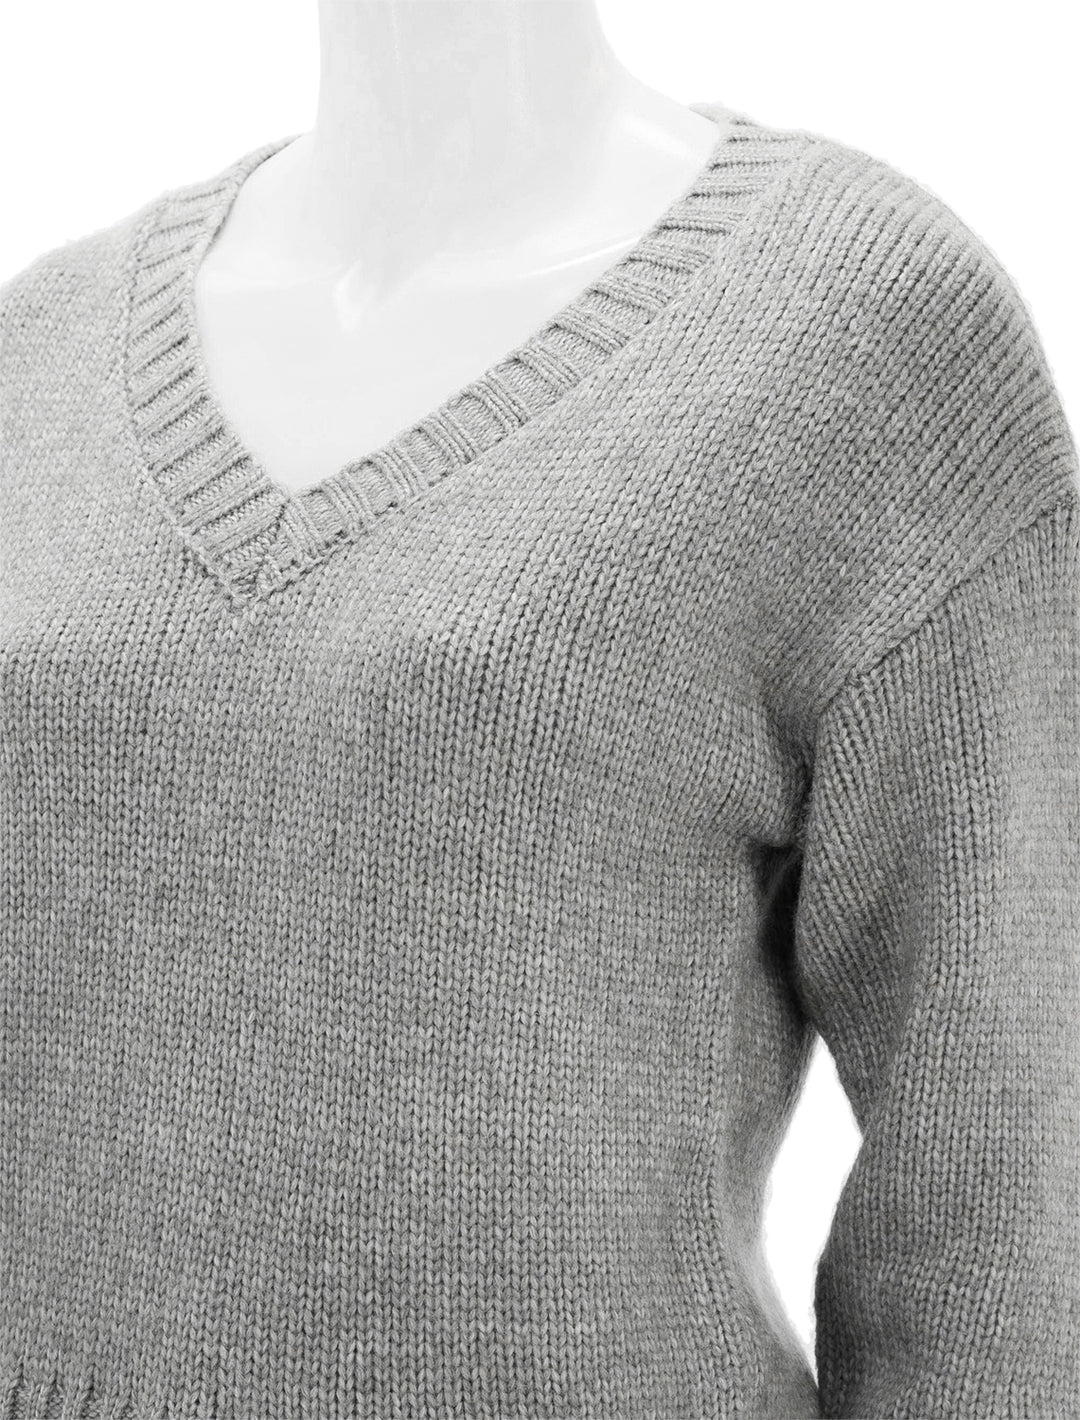 Close-up view of Steve Madden's houston sweater in heather grey.